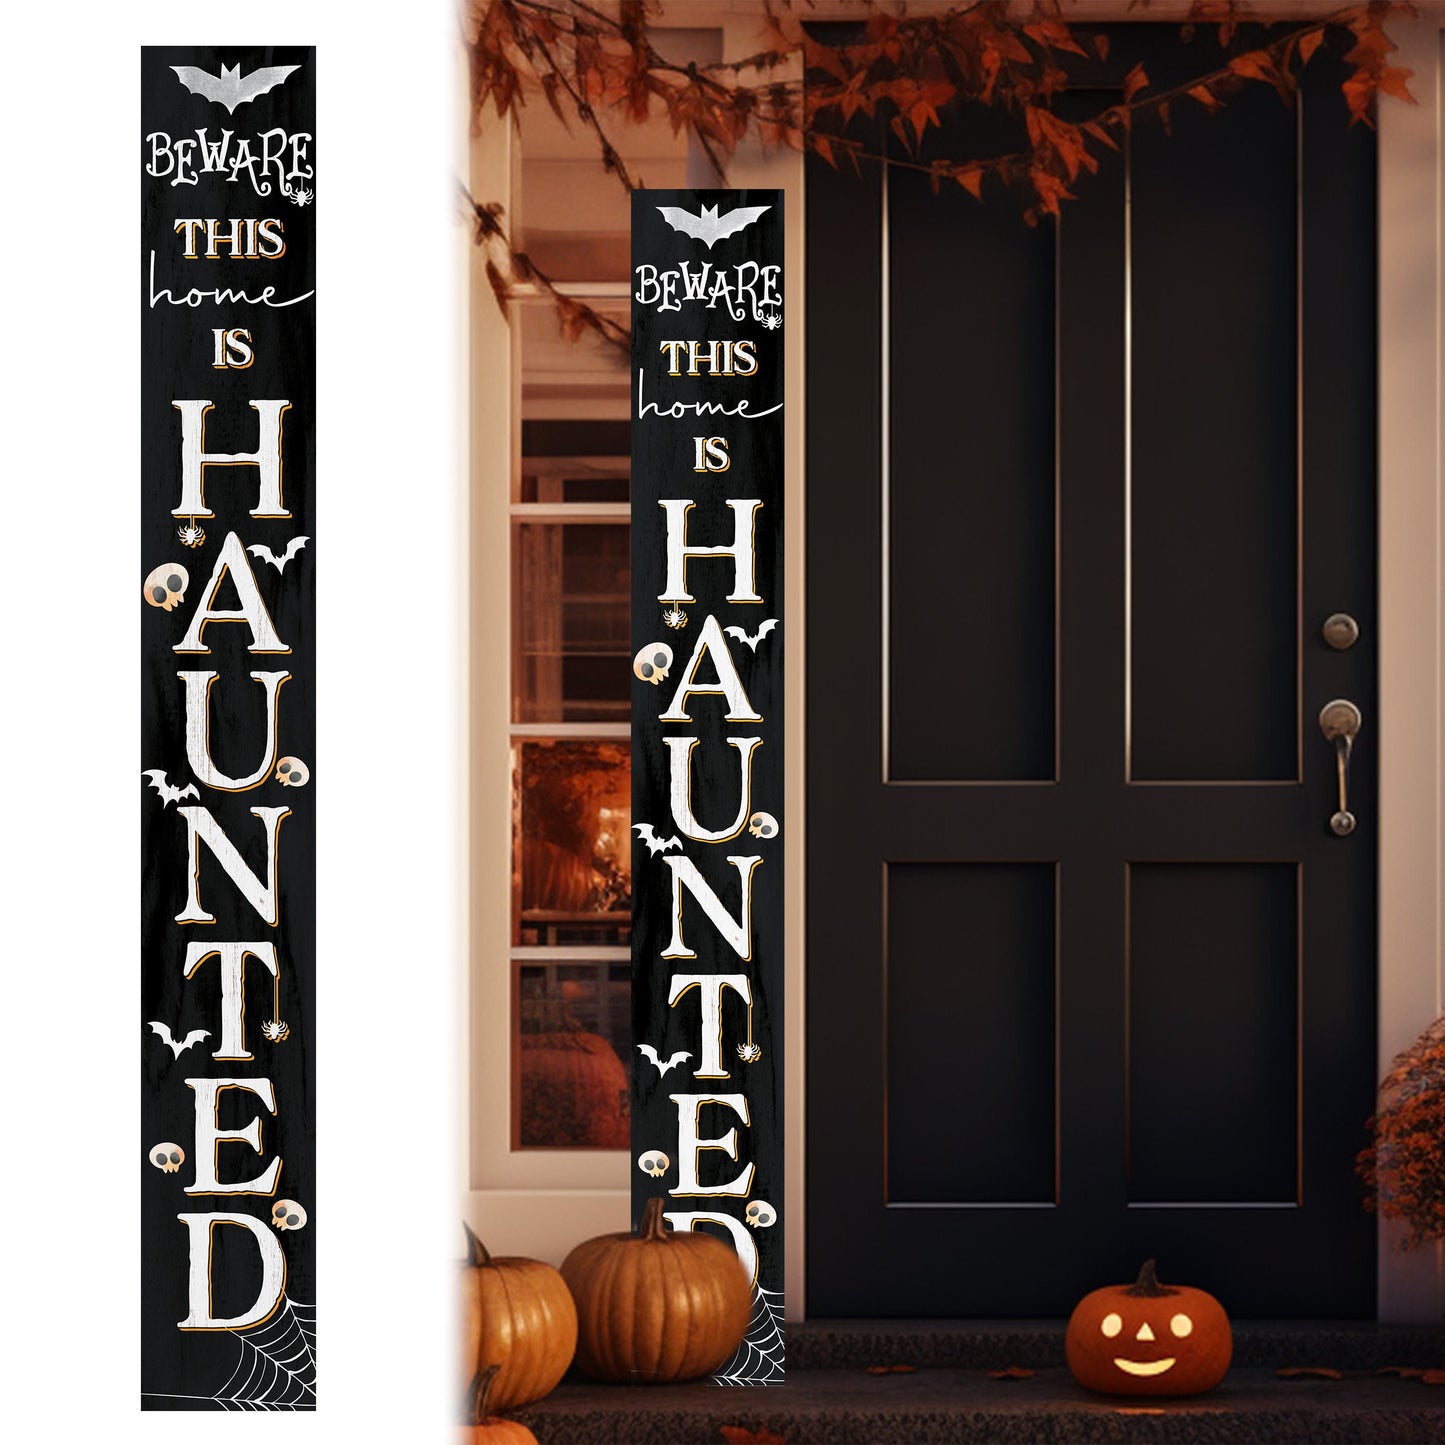 72in Wooden "Beware This Home is Haunted" Halloween Porch Sign - Spooky Front Door Decor for Captivating Halloween Celebrations